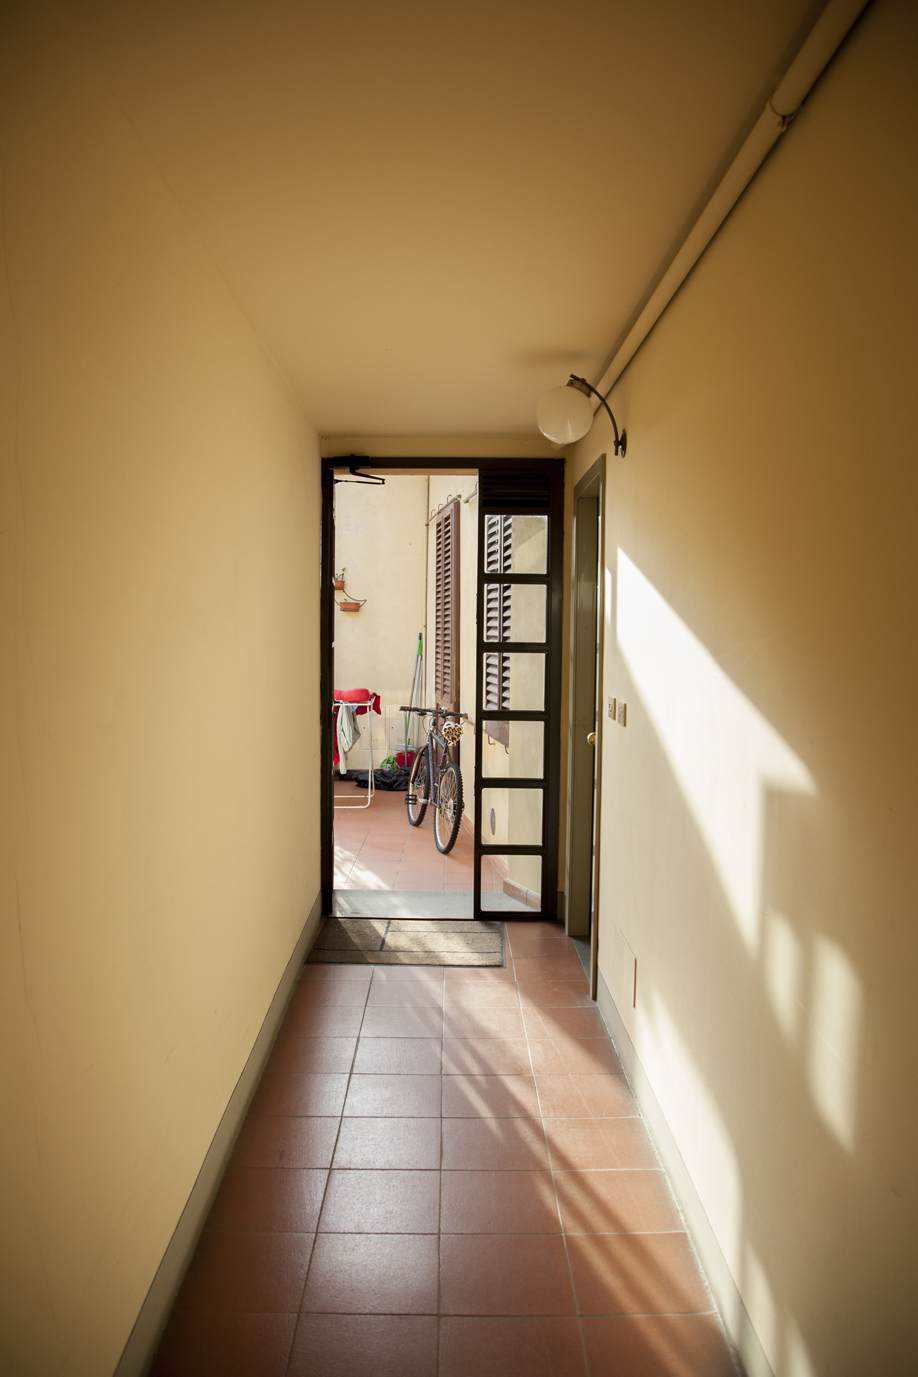 Inside AirBnb apartment in Florence, Italy.